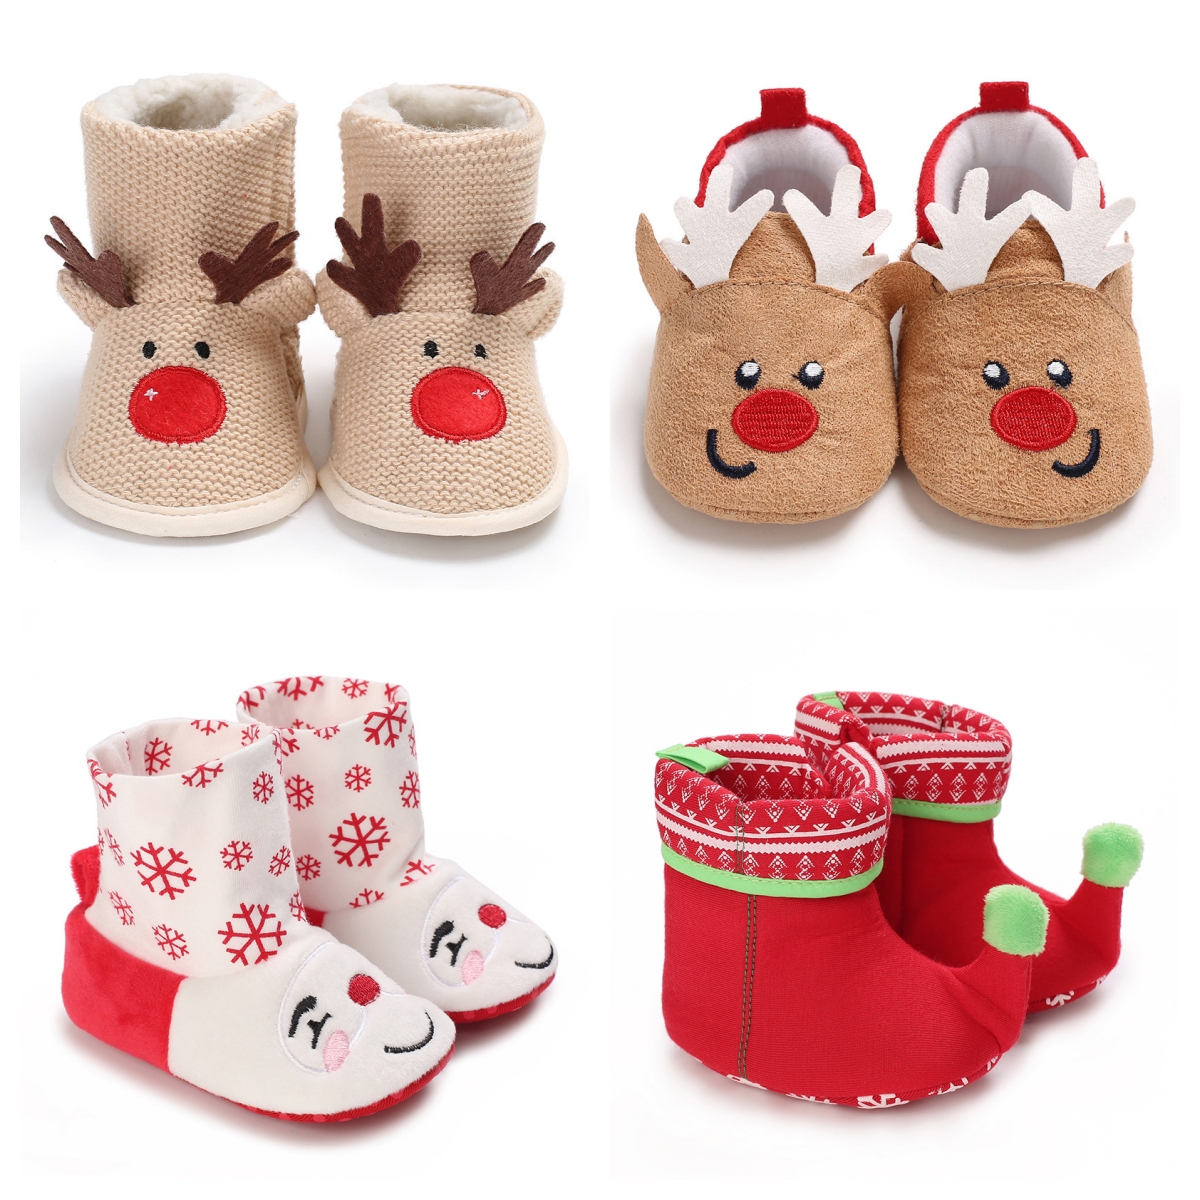 Infant Winter Snow Boots Christmas Cute Cartoon Patterned Boots Warm Baby